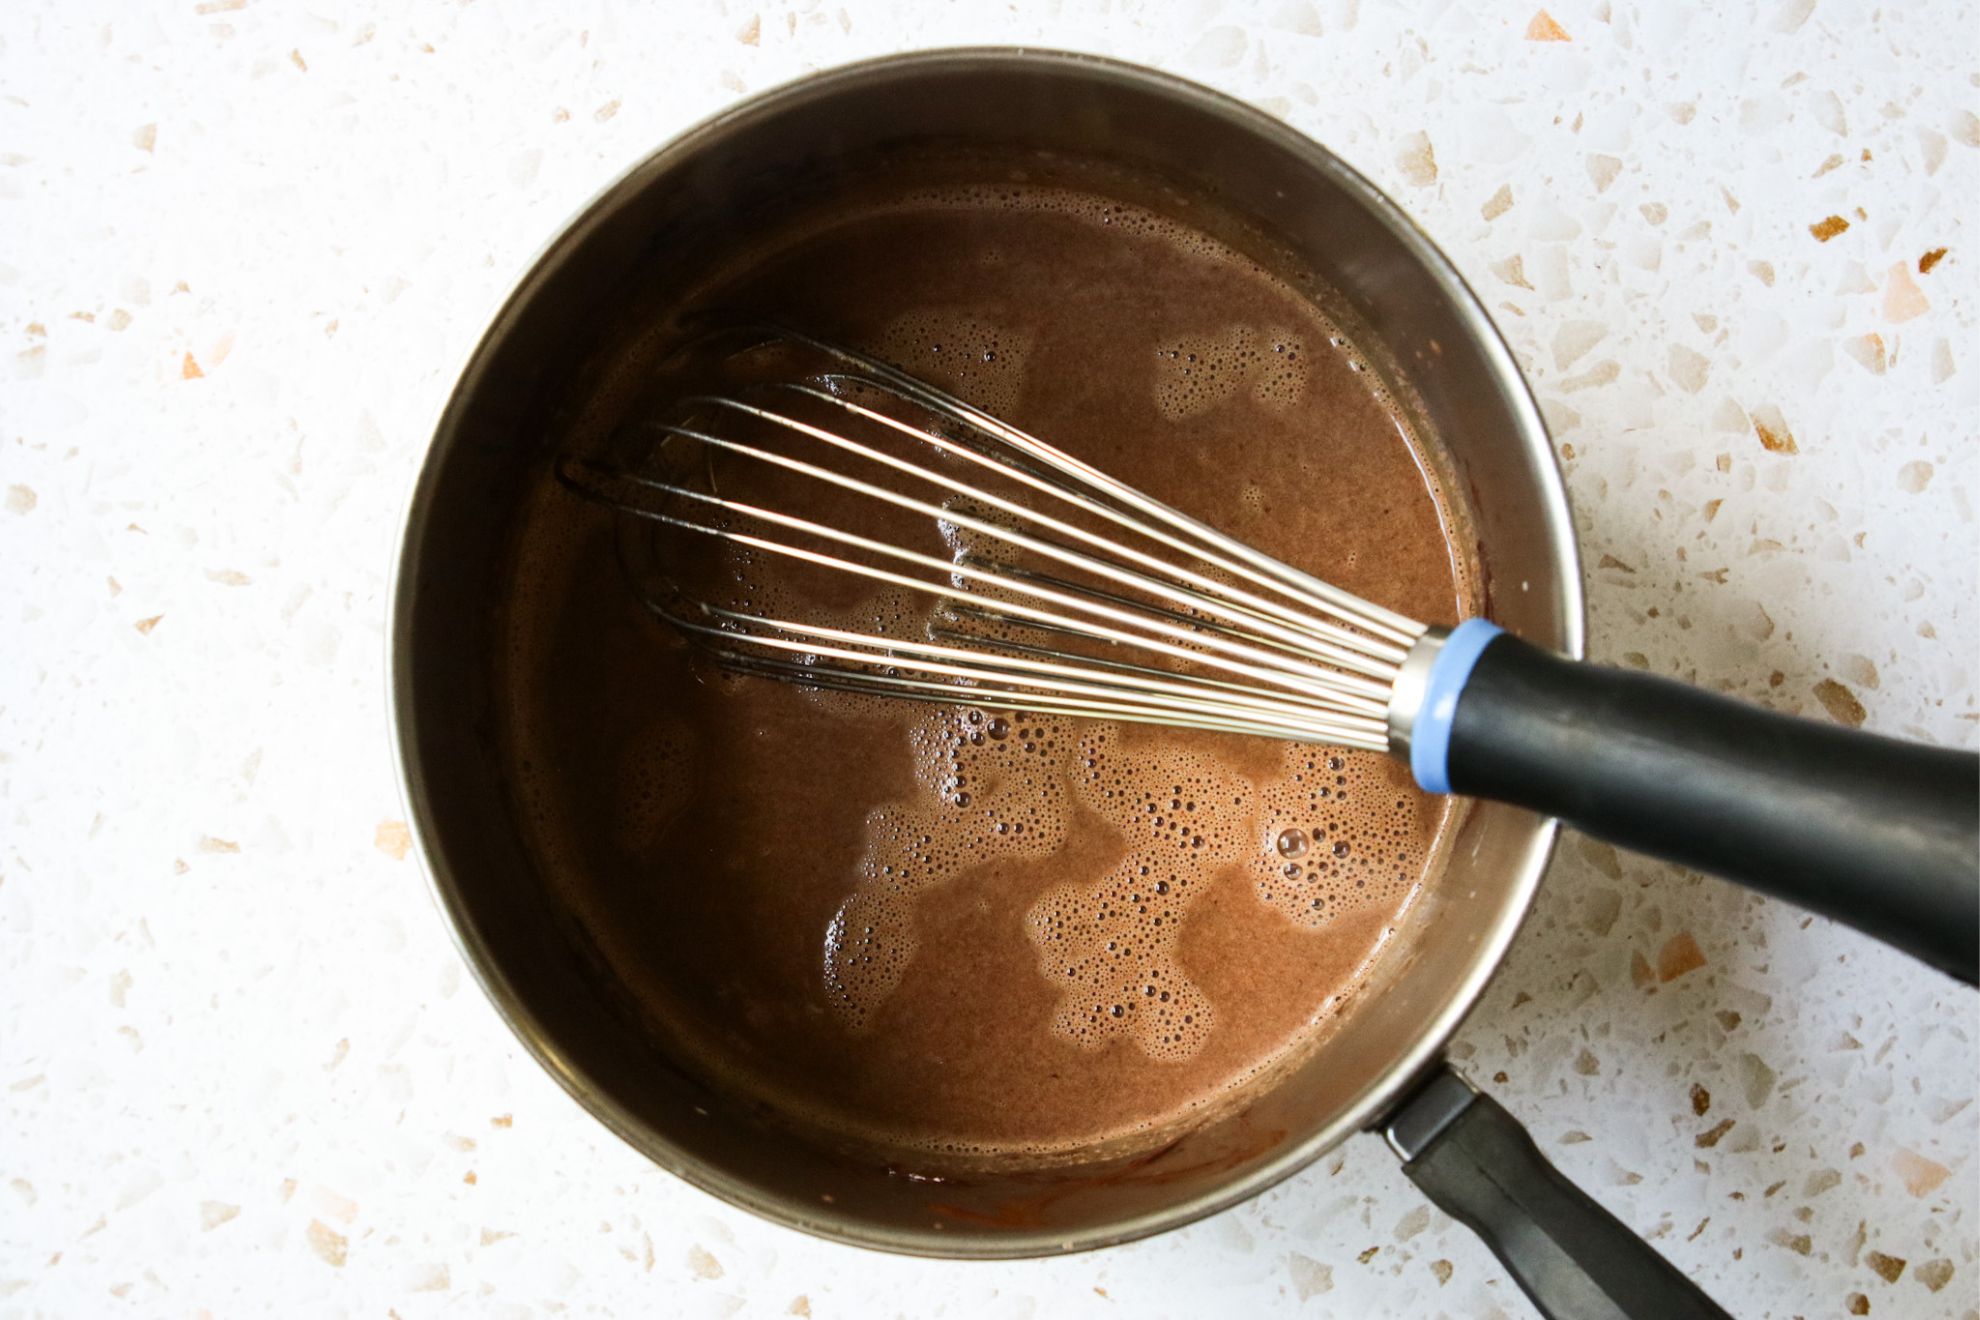 This is an overhead horizontal image of a stainless steel saucepan with a chocolate liquid in it. The pan sits on a white and tan terrazzo surface. A silver whisk with a black rubber handle is in the pan with the handle leaning against the side of the pan. The handle is pointing to the right side of the image.